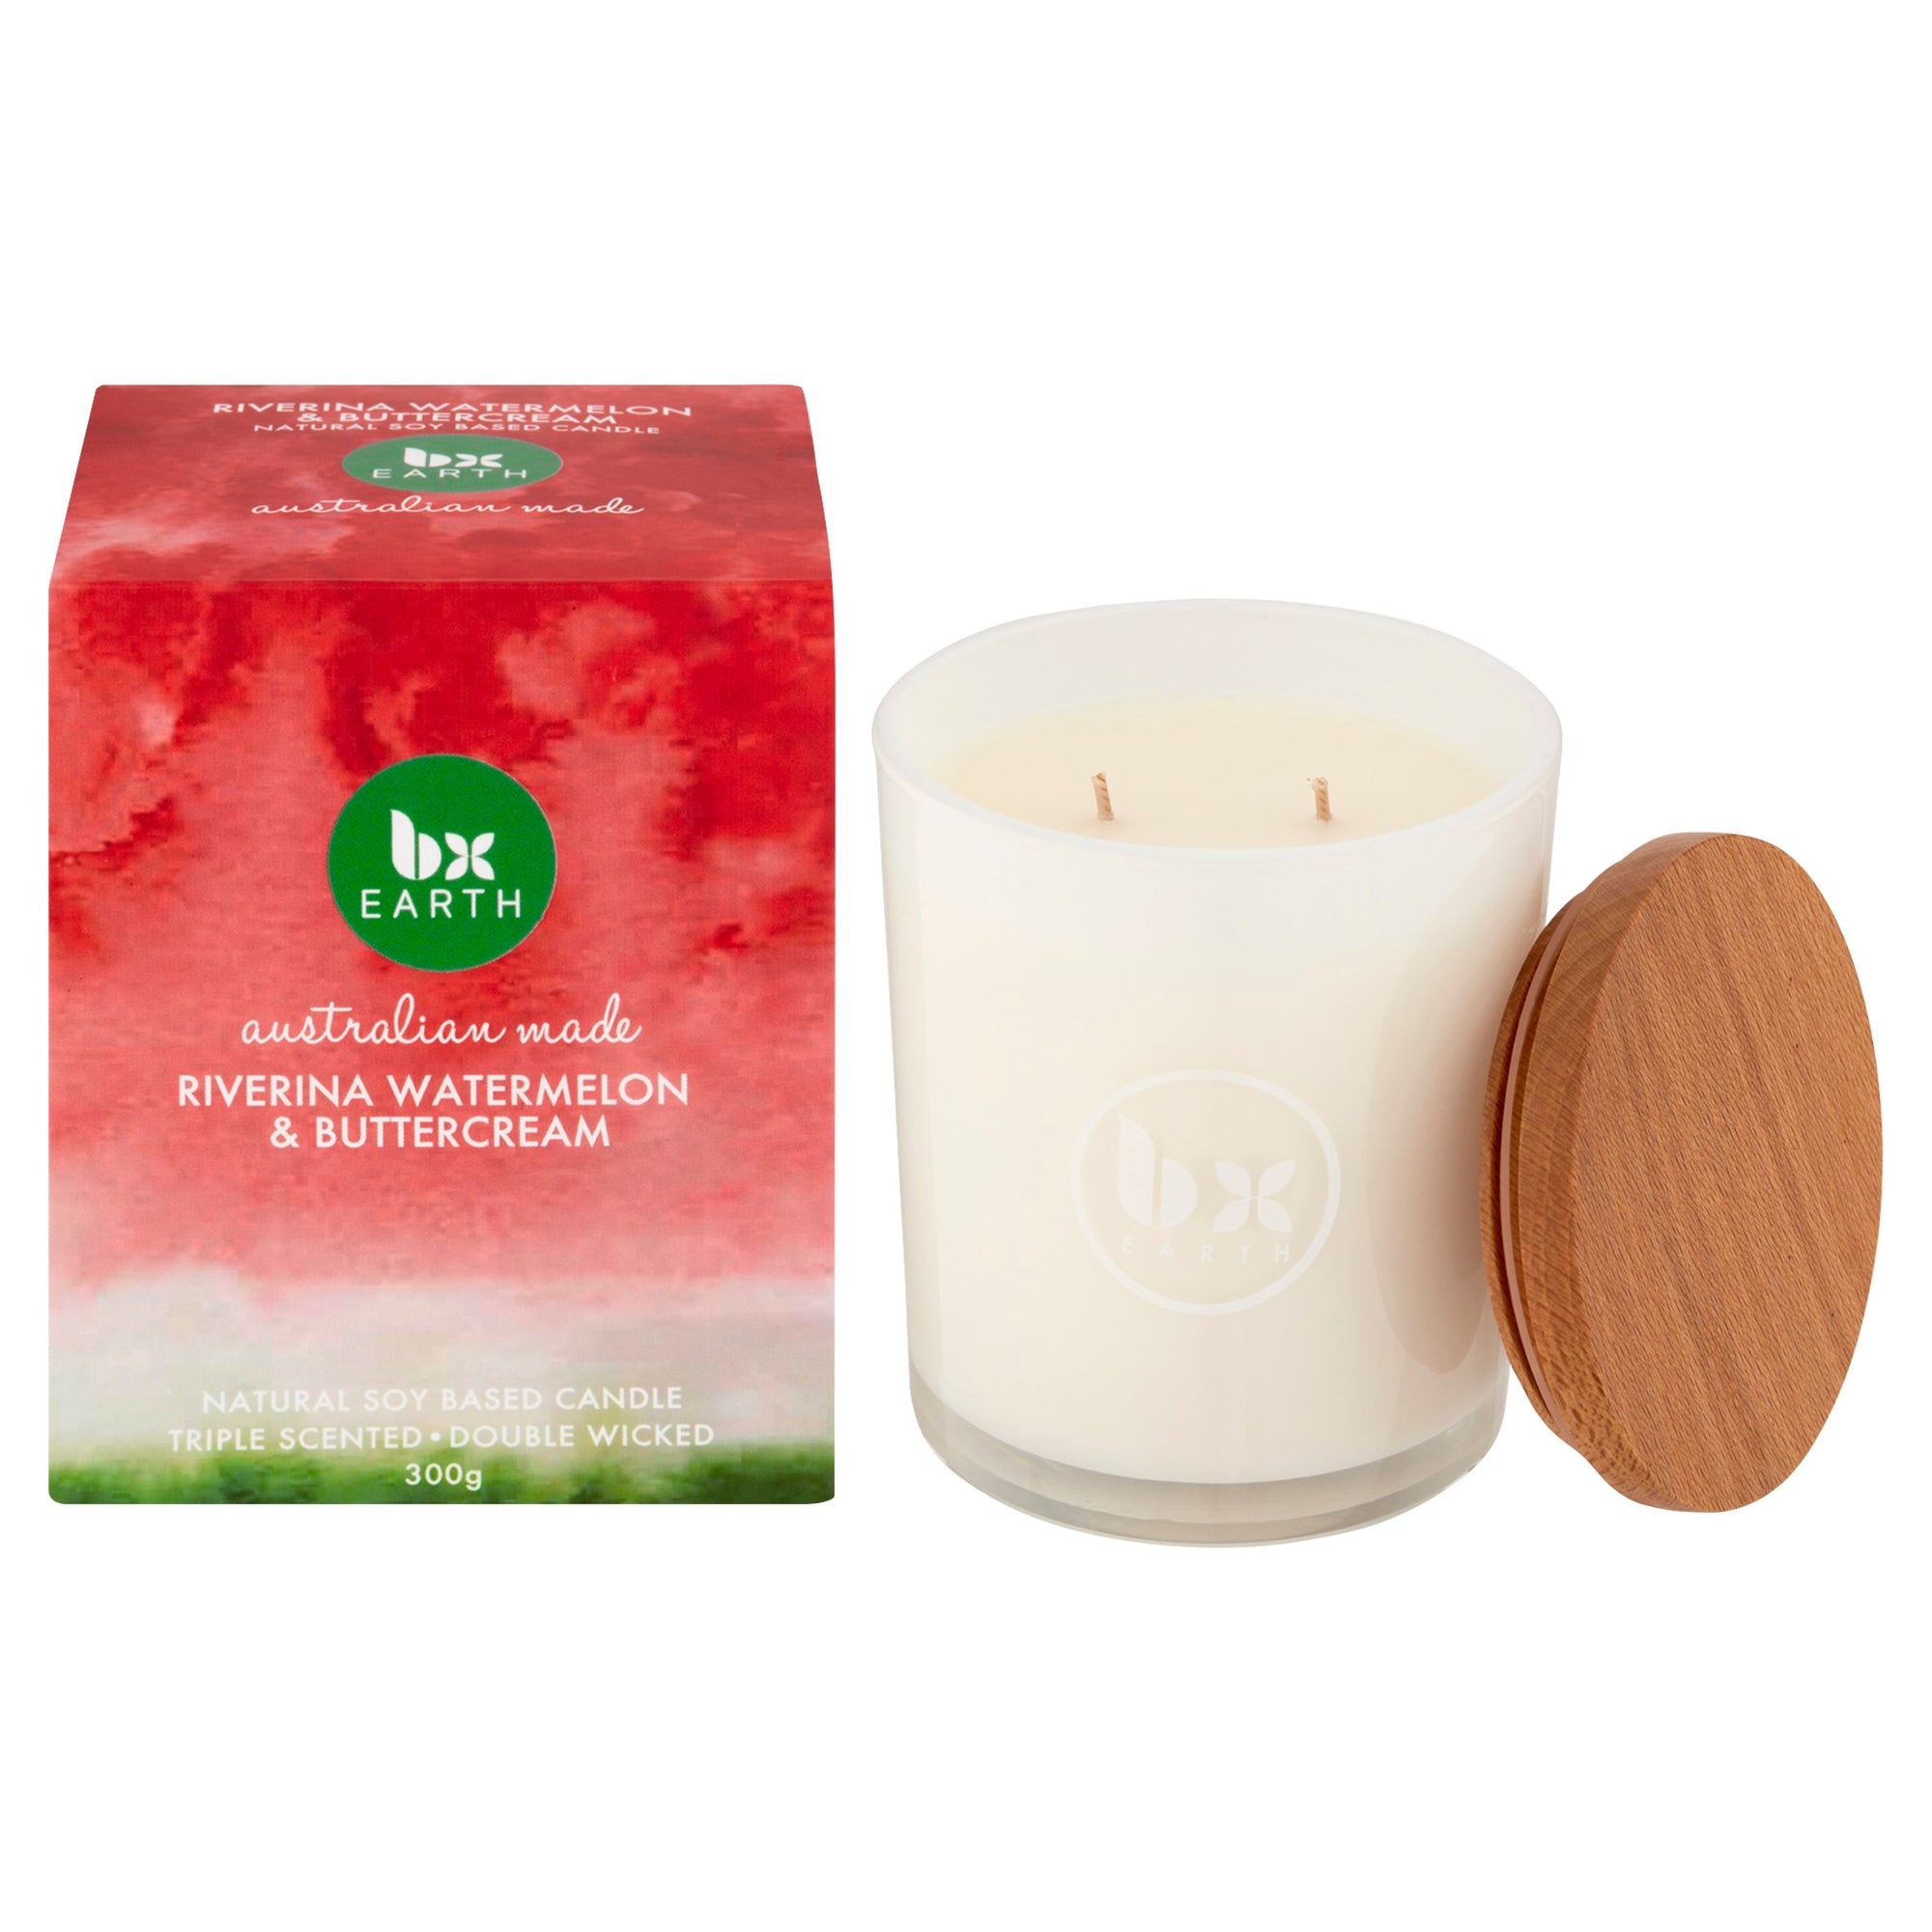 Riverina Watermelon and Buttercream Natural Soy Based Candle